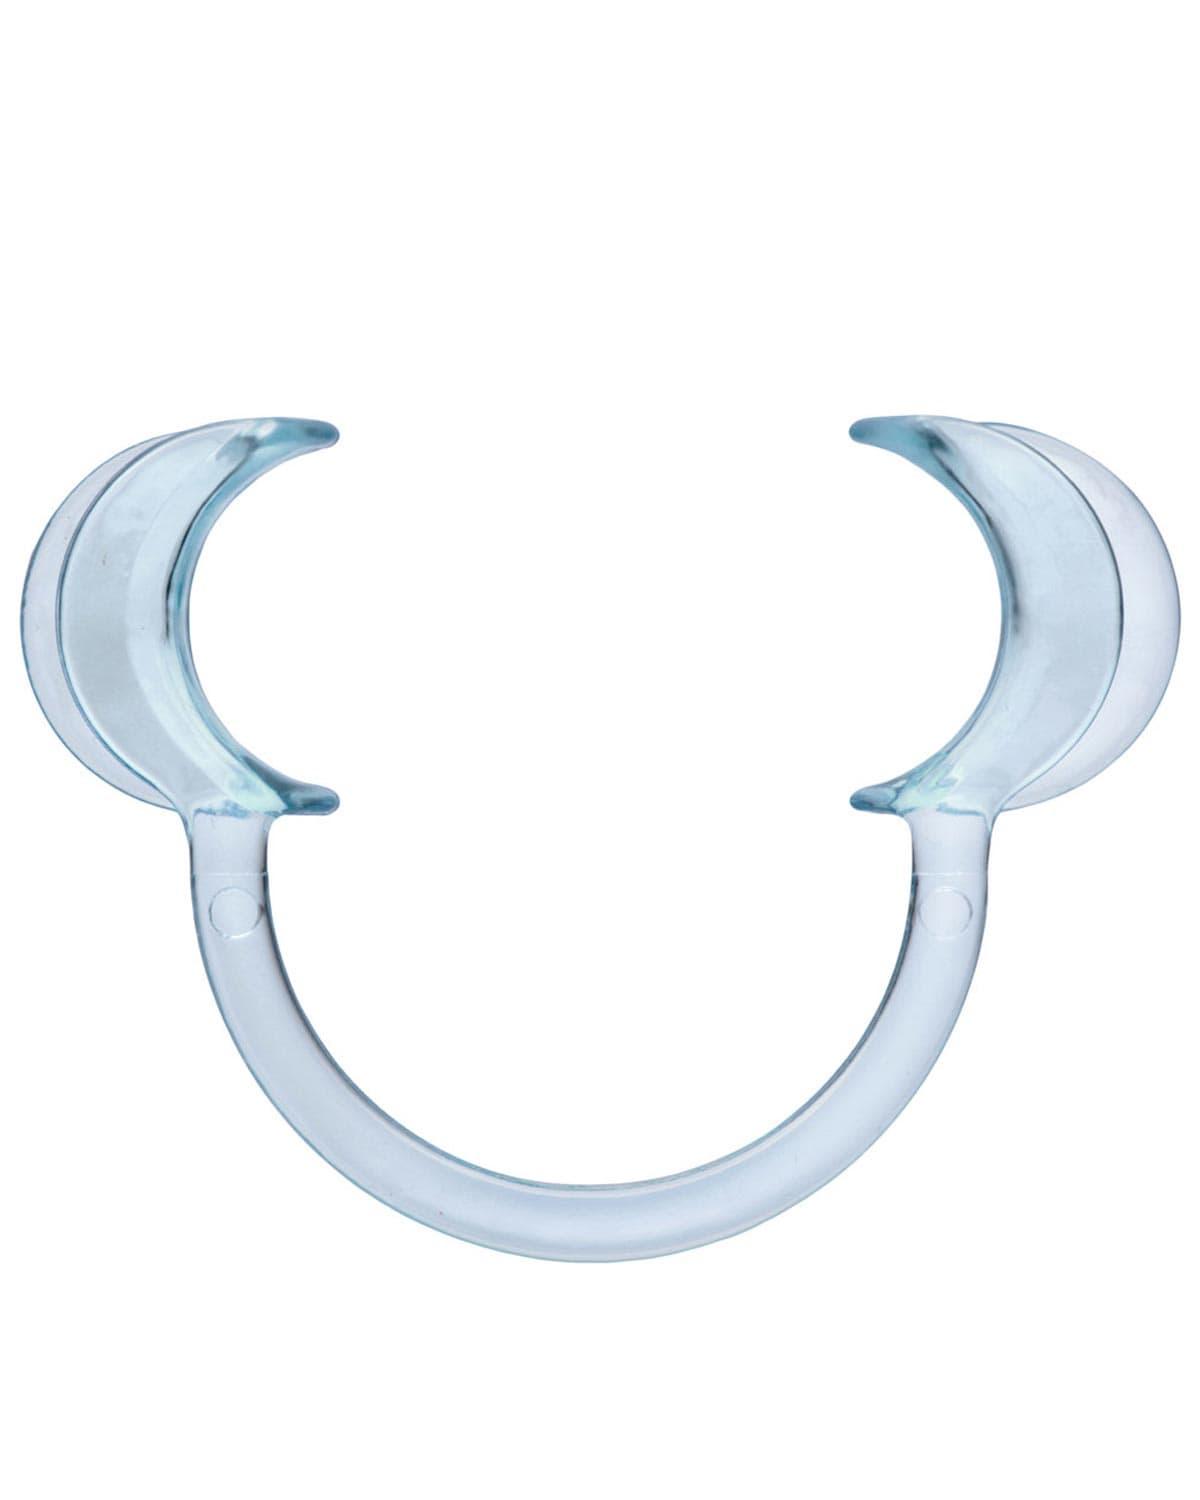 Cheek Retractor Dental Mouth Gag - Thorn & Feather Sex Toy Canada